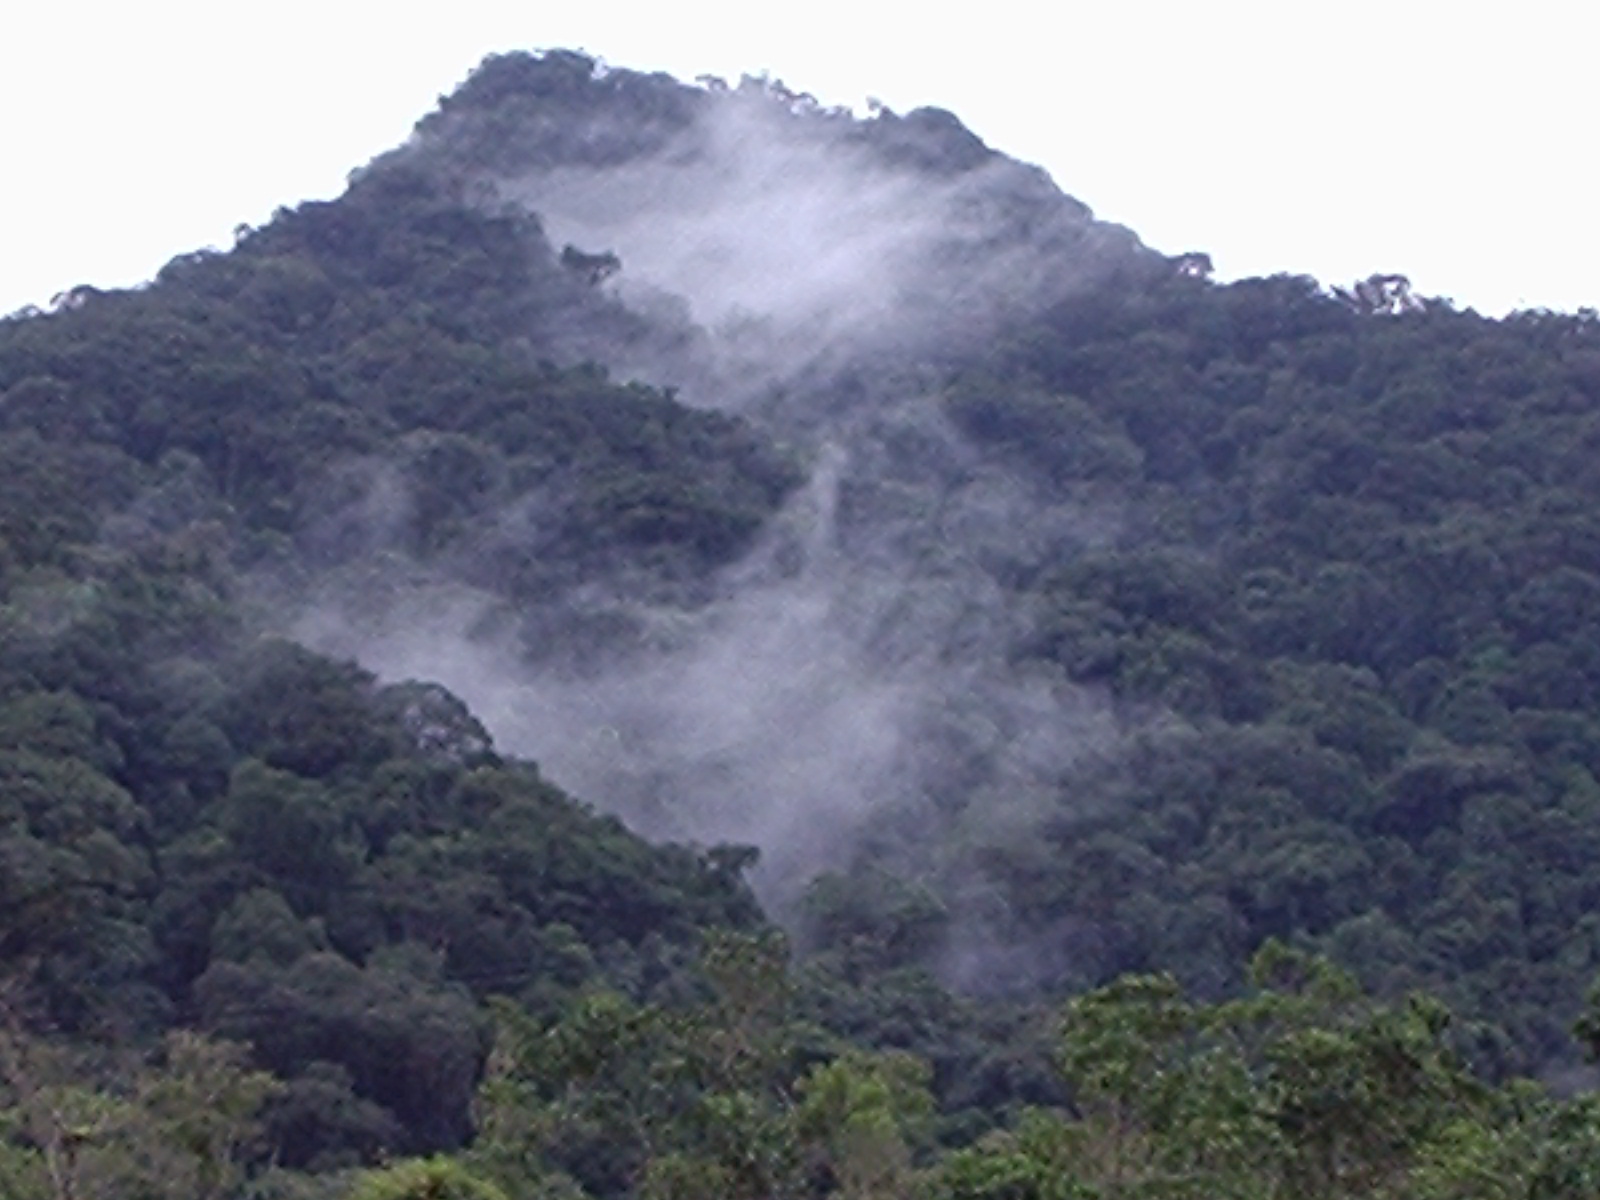 clouds cover the mountains behind trees in the wilderness